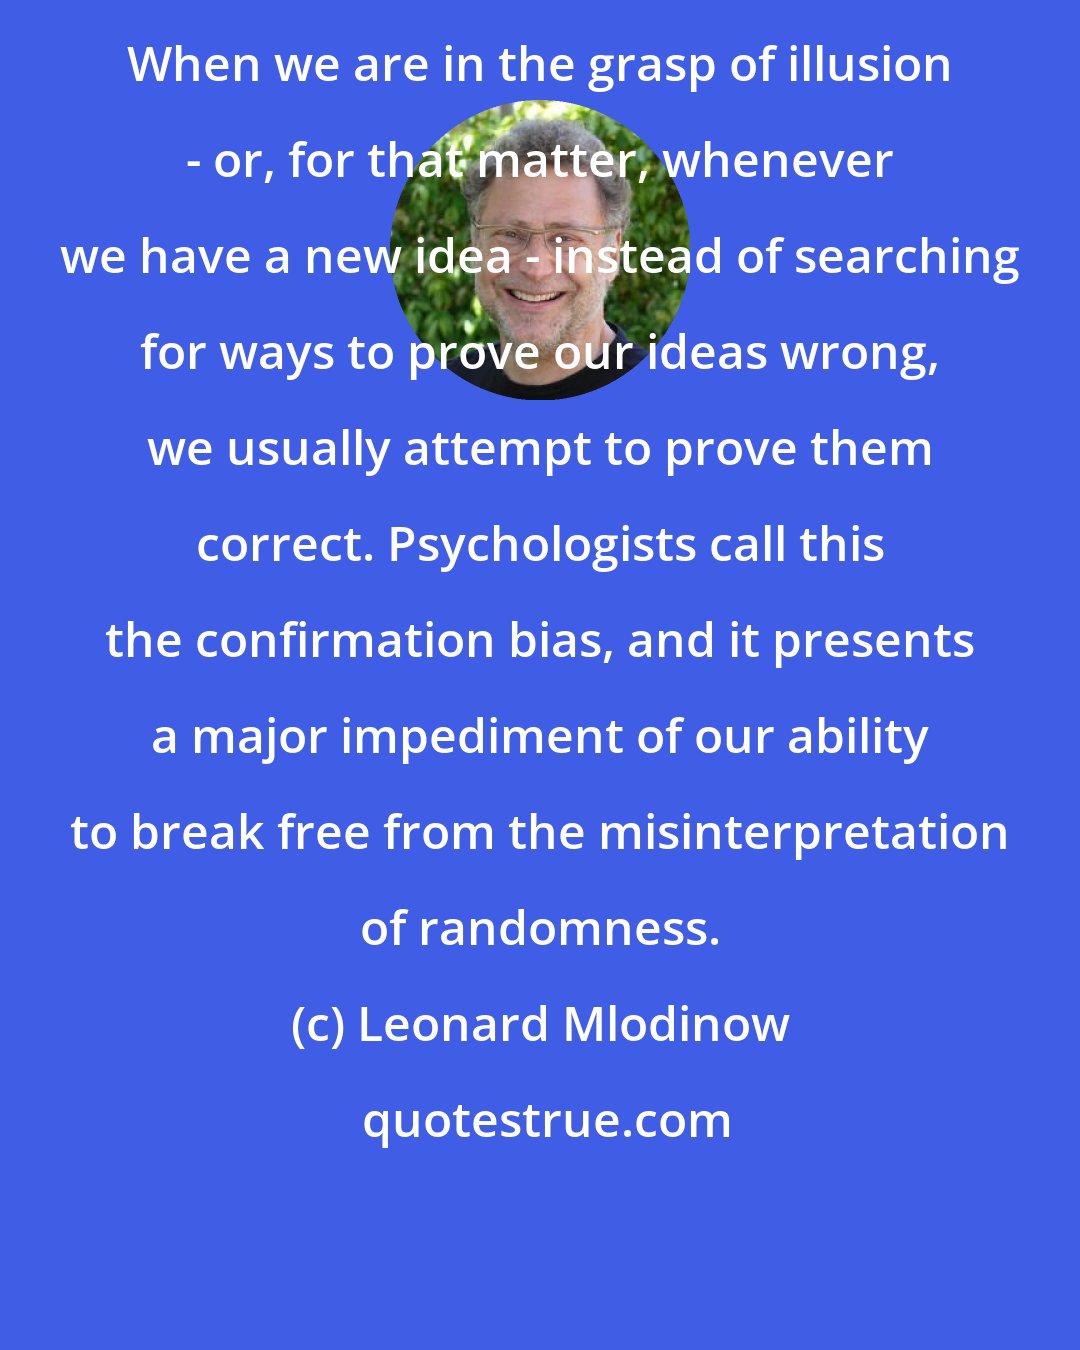 Leonard Mlodinow: When we are in the grasp of illusion - or, for that matter, whenever we have a new idea - instead of searching for ways to prove our ideas wrong, we usually attempt to prove them correct. Psychologists call this the confirmation bias, and it presents a major impediment of our ability to break free from the misinterpretation of randomness.